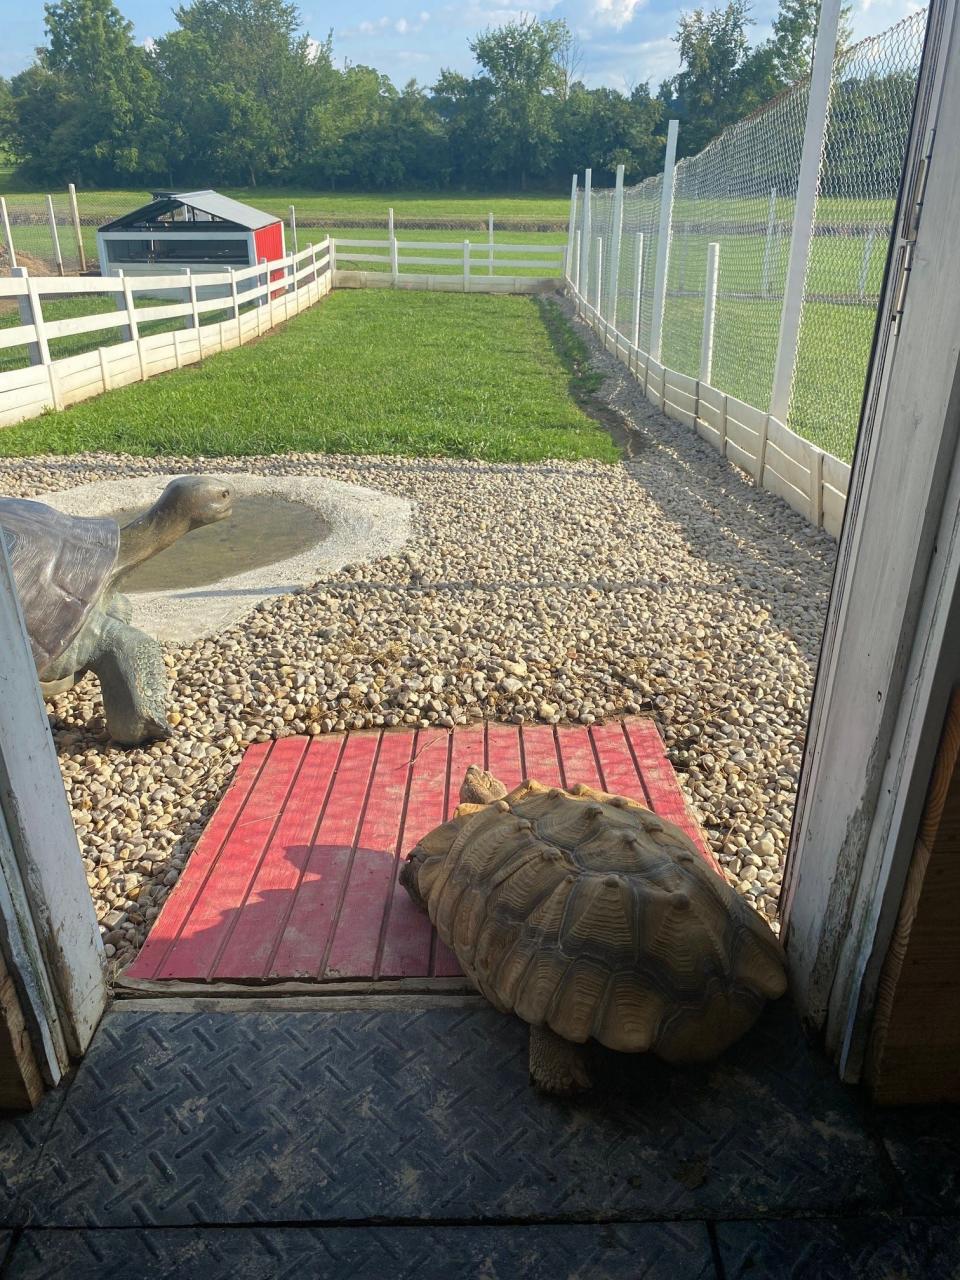 Oscar the African Sulcata tortoise, at right, heads out for a walk at the Westmeister Farm, which is open to visitors year round at 4097 Plymouth-Springmill Road. Private tours are offered to individuals or groups.